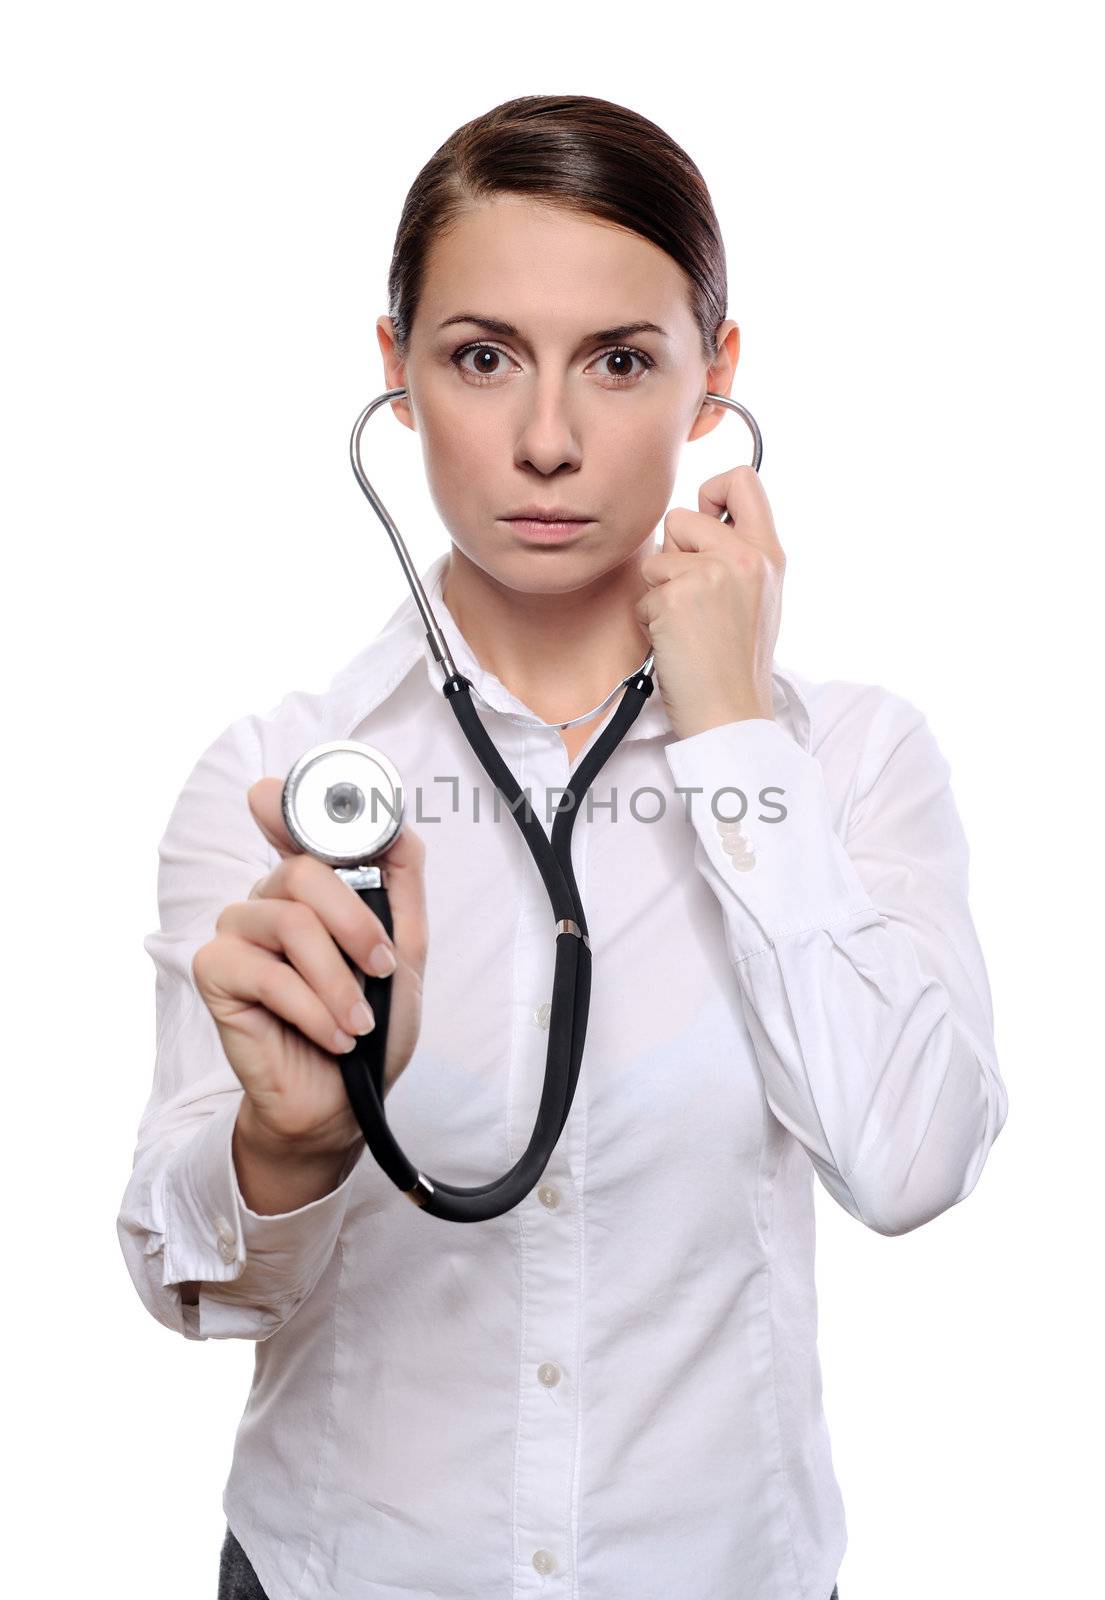 Strict female doctor listen with a stethoscope isolated on white background